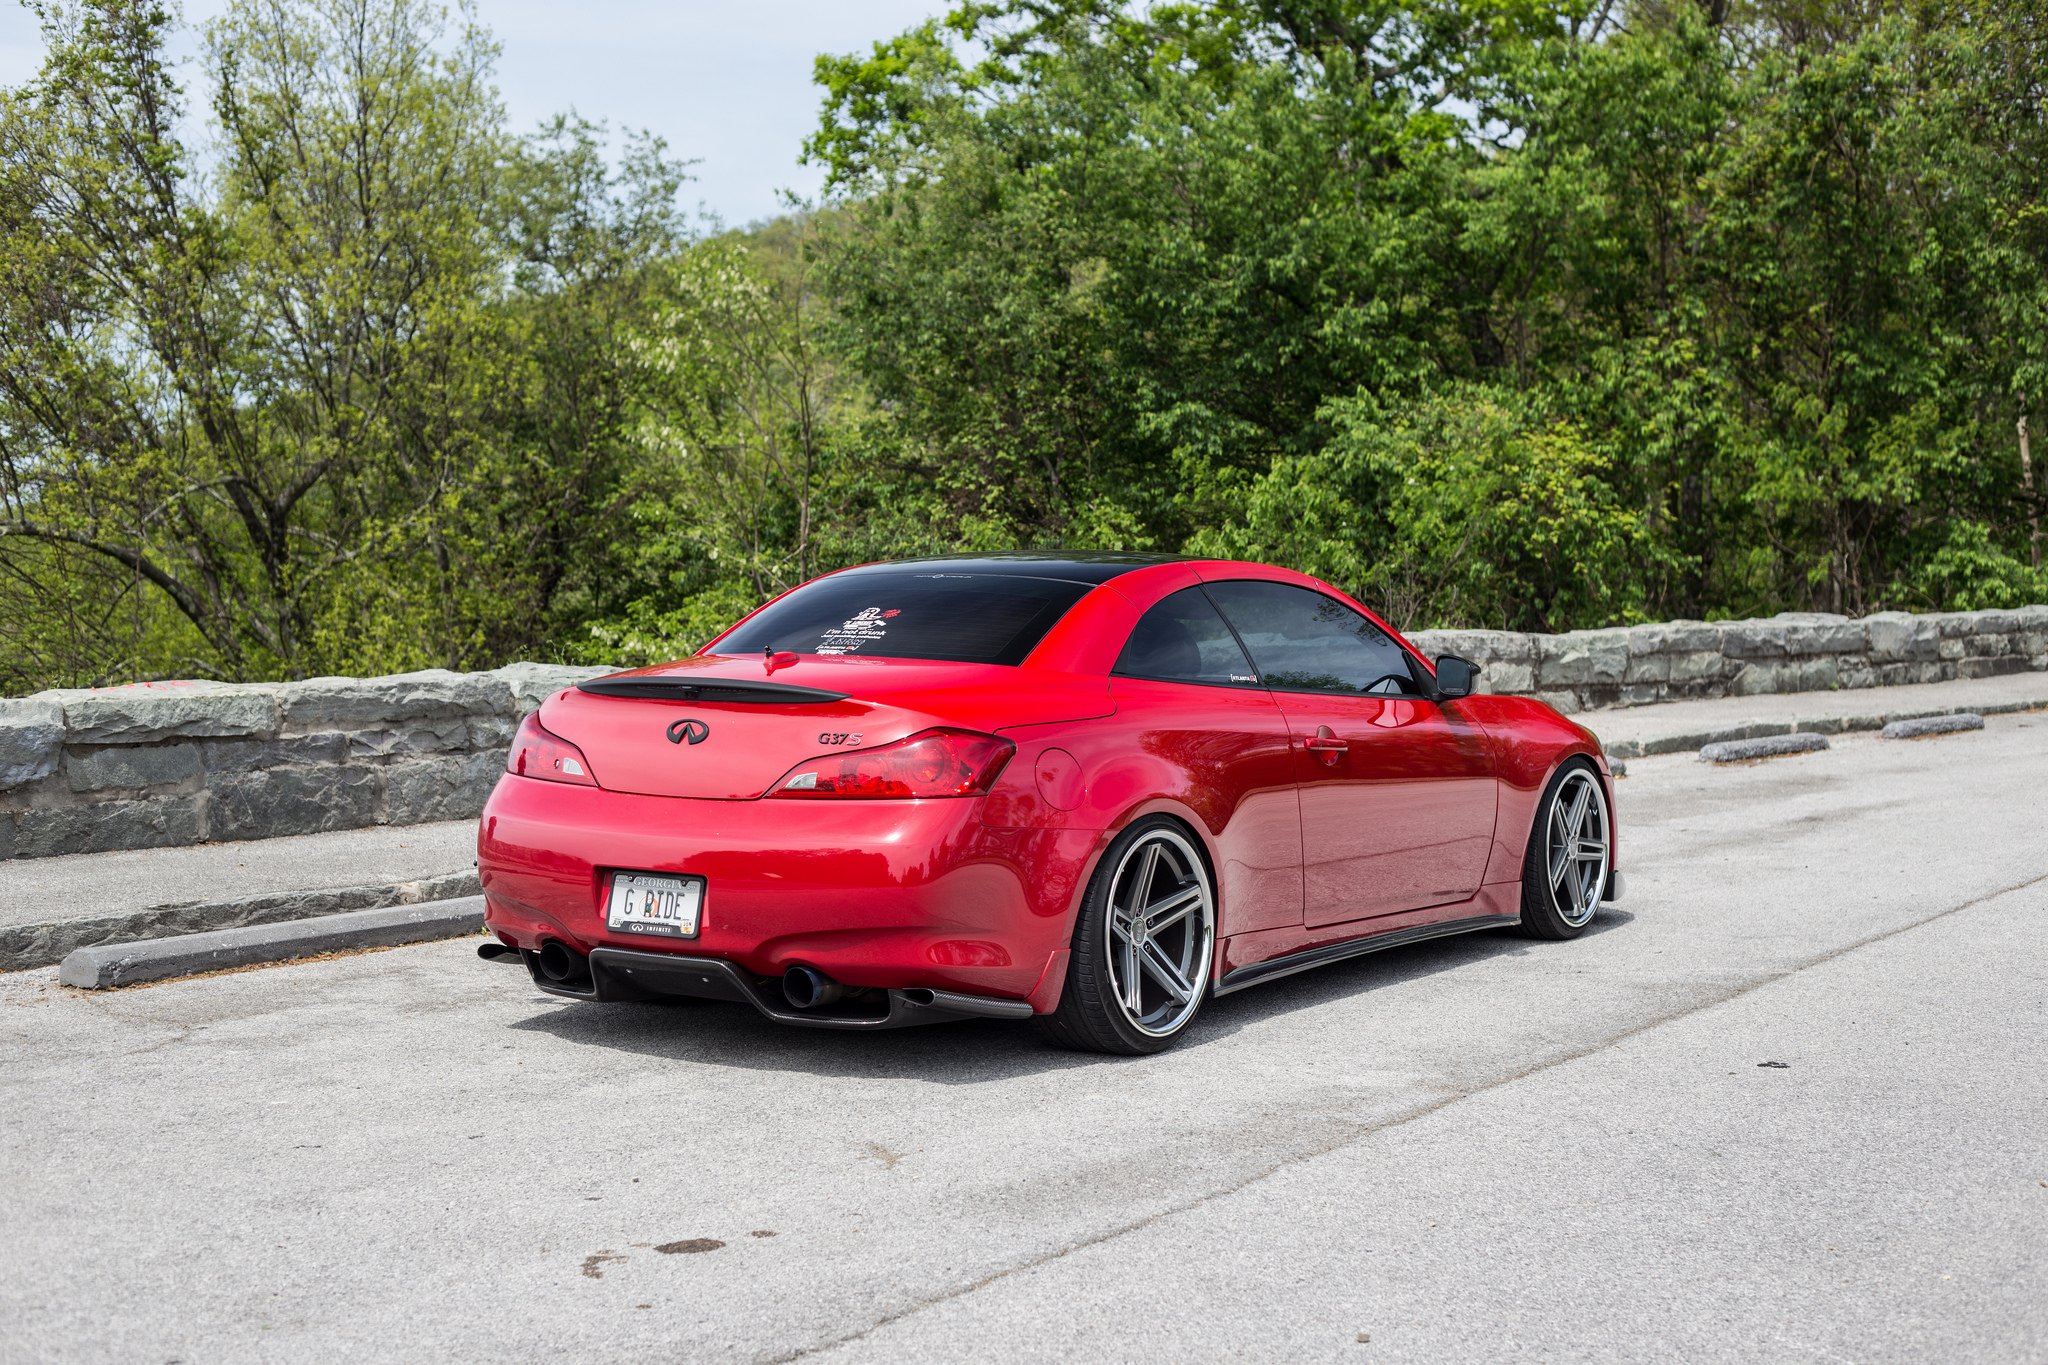 Carbon Fiber Rear Diffuser on Red Infiniti G37 - Photo by Concept One